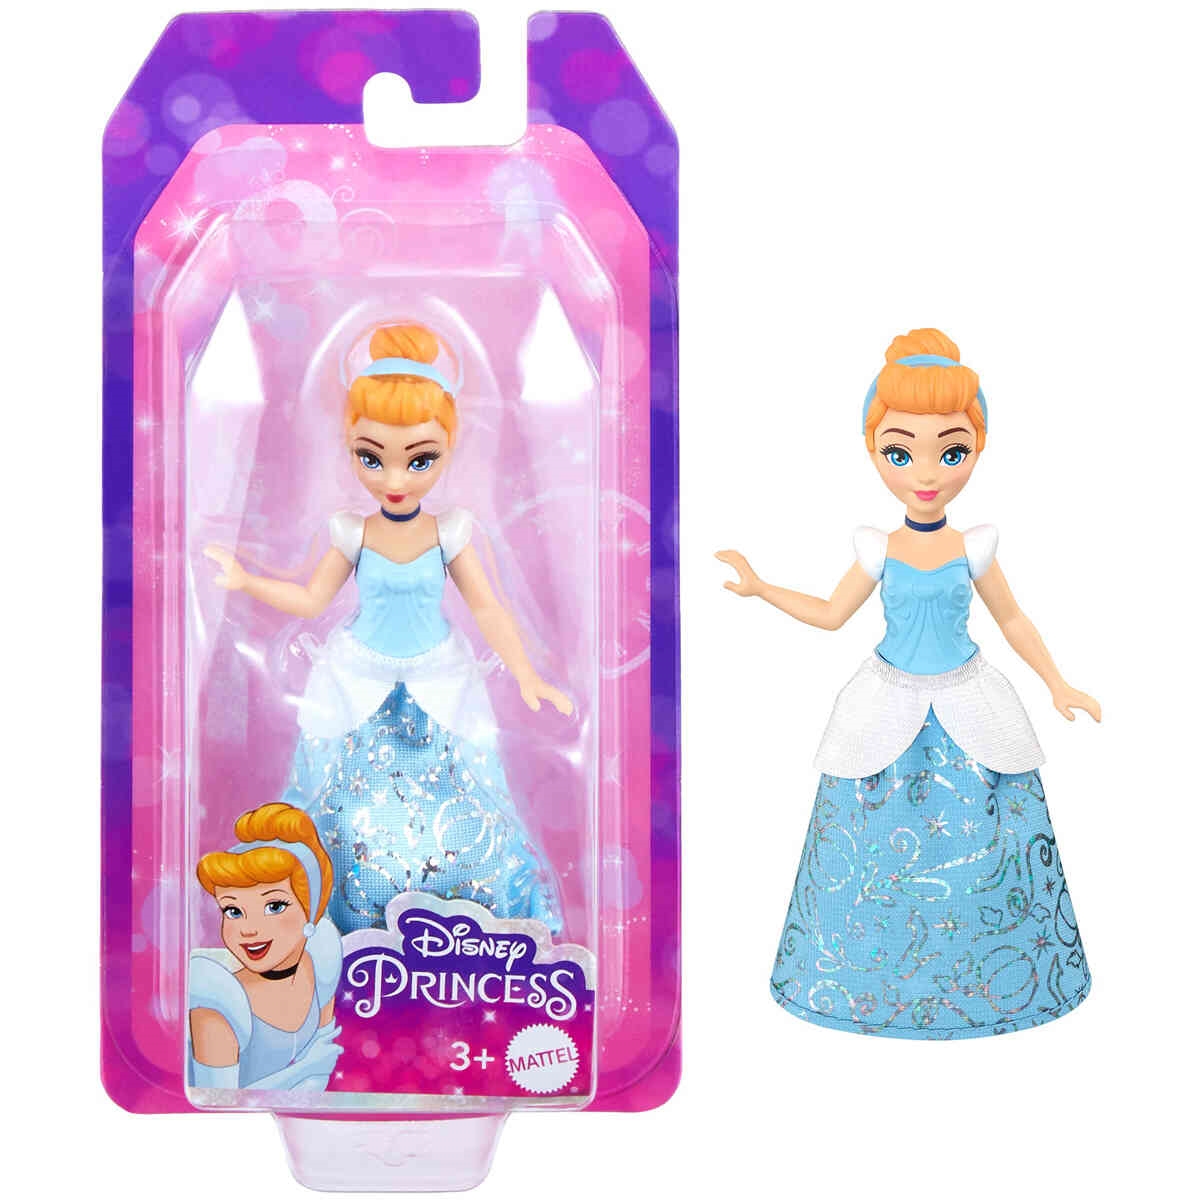 DISNEY Princess Cinderella Mini Doll Playset - Princess Cinderella Mini Doll  Playset . Buy Cinderella toys in India. shop for DISNEY products in India.